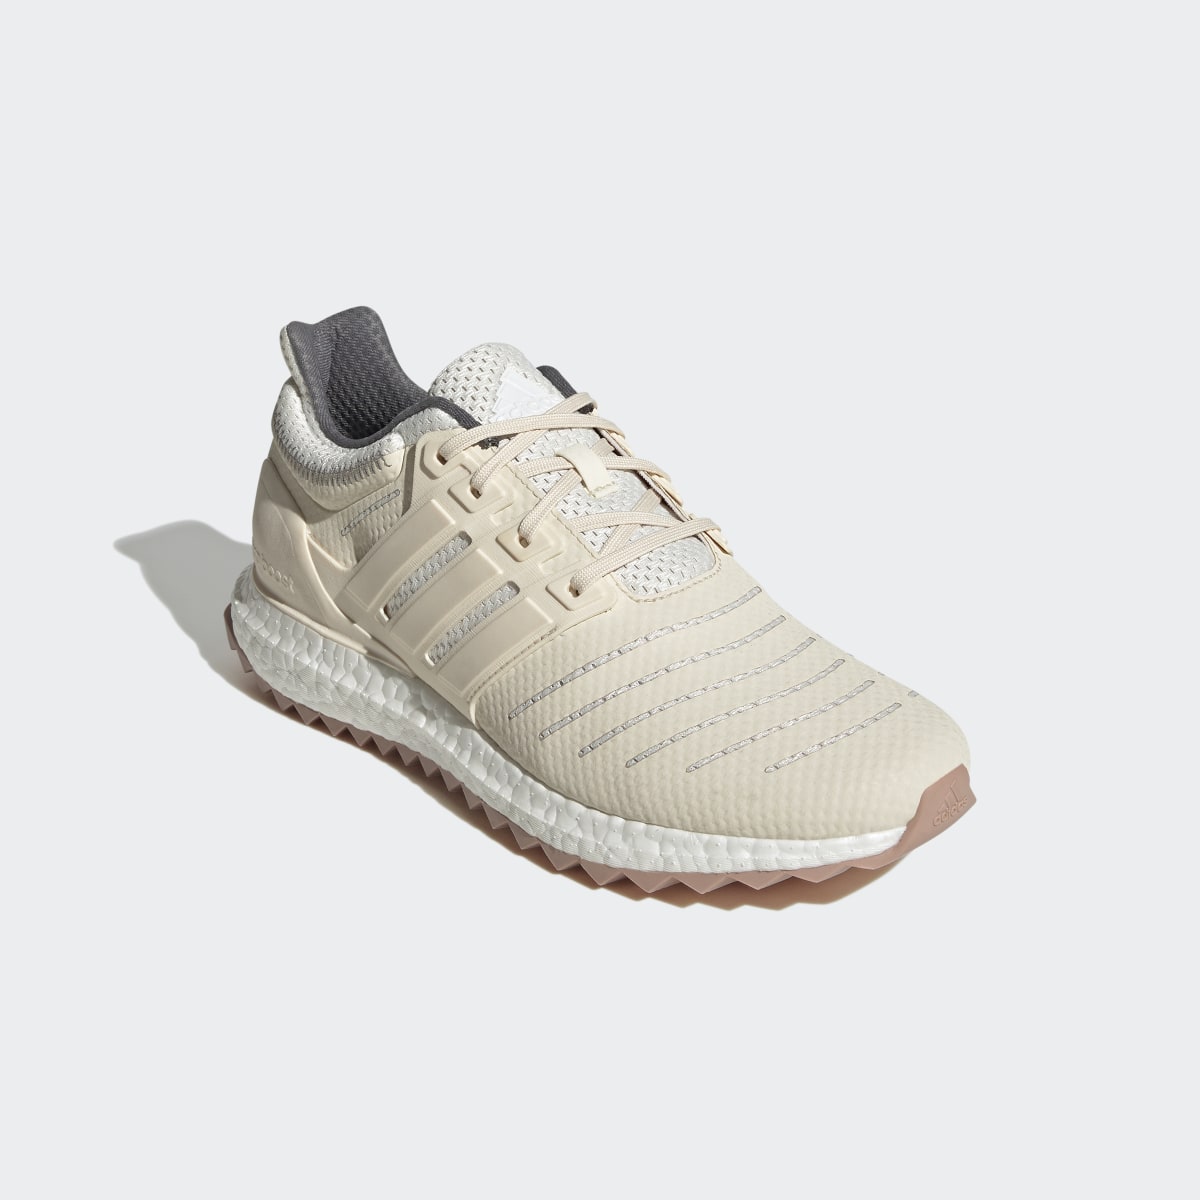 Adidas Ultraboost DNA XXII Lifestyle Running Sportswear Capsule Collection Shoes. 5